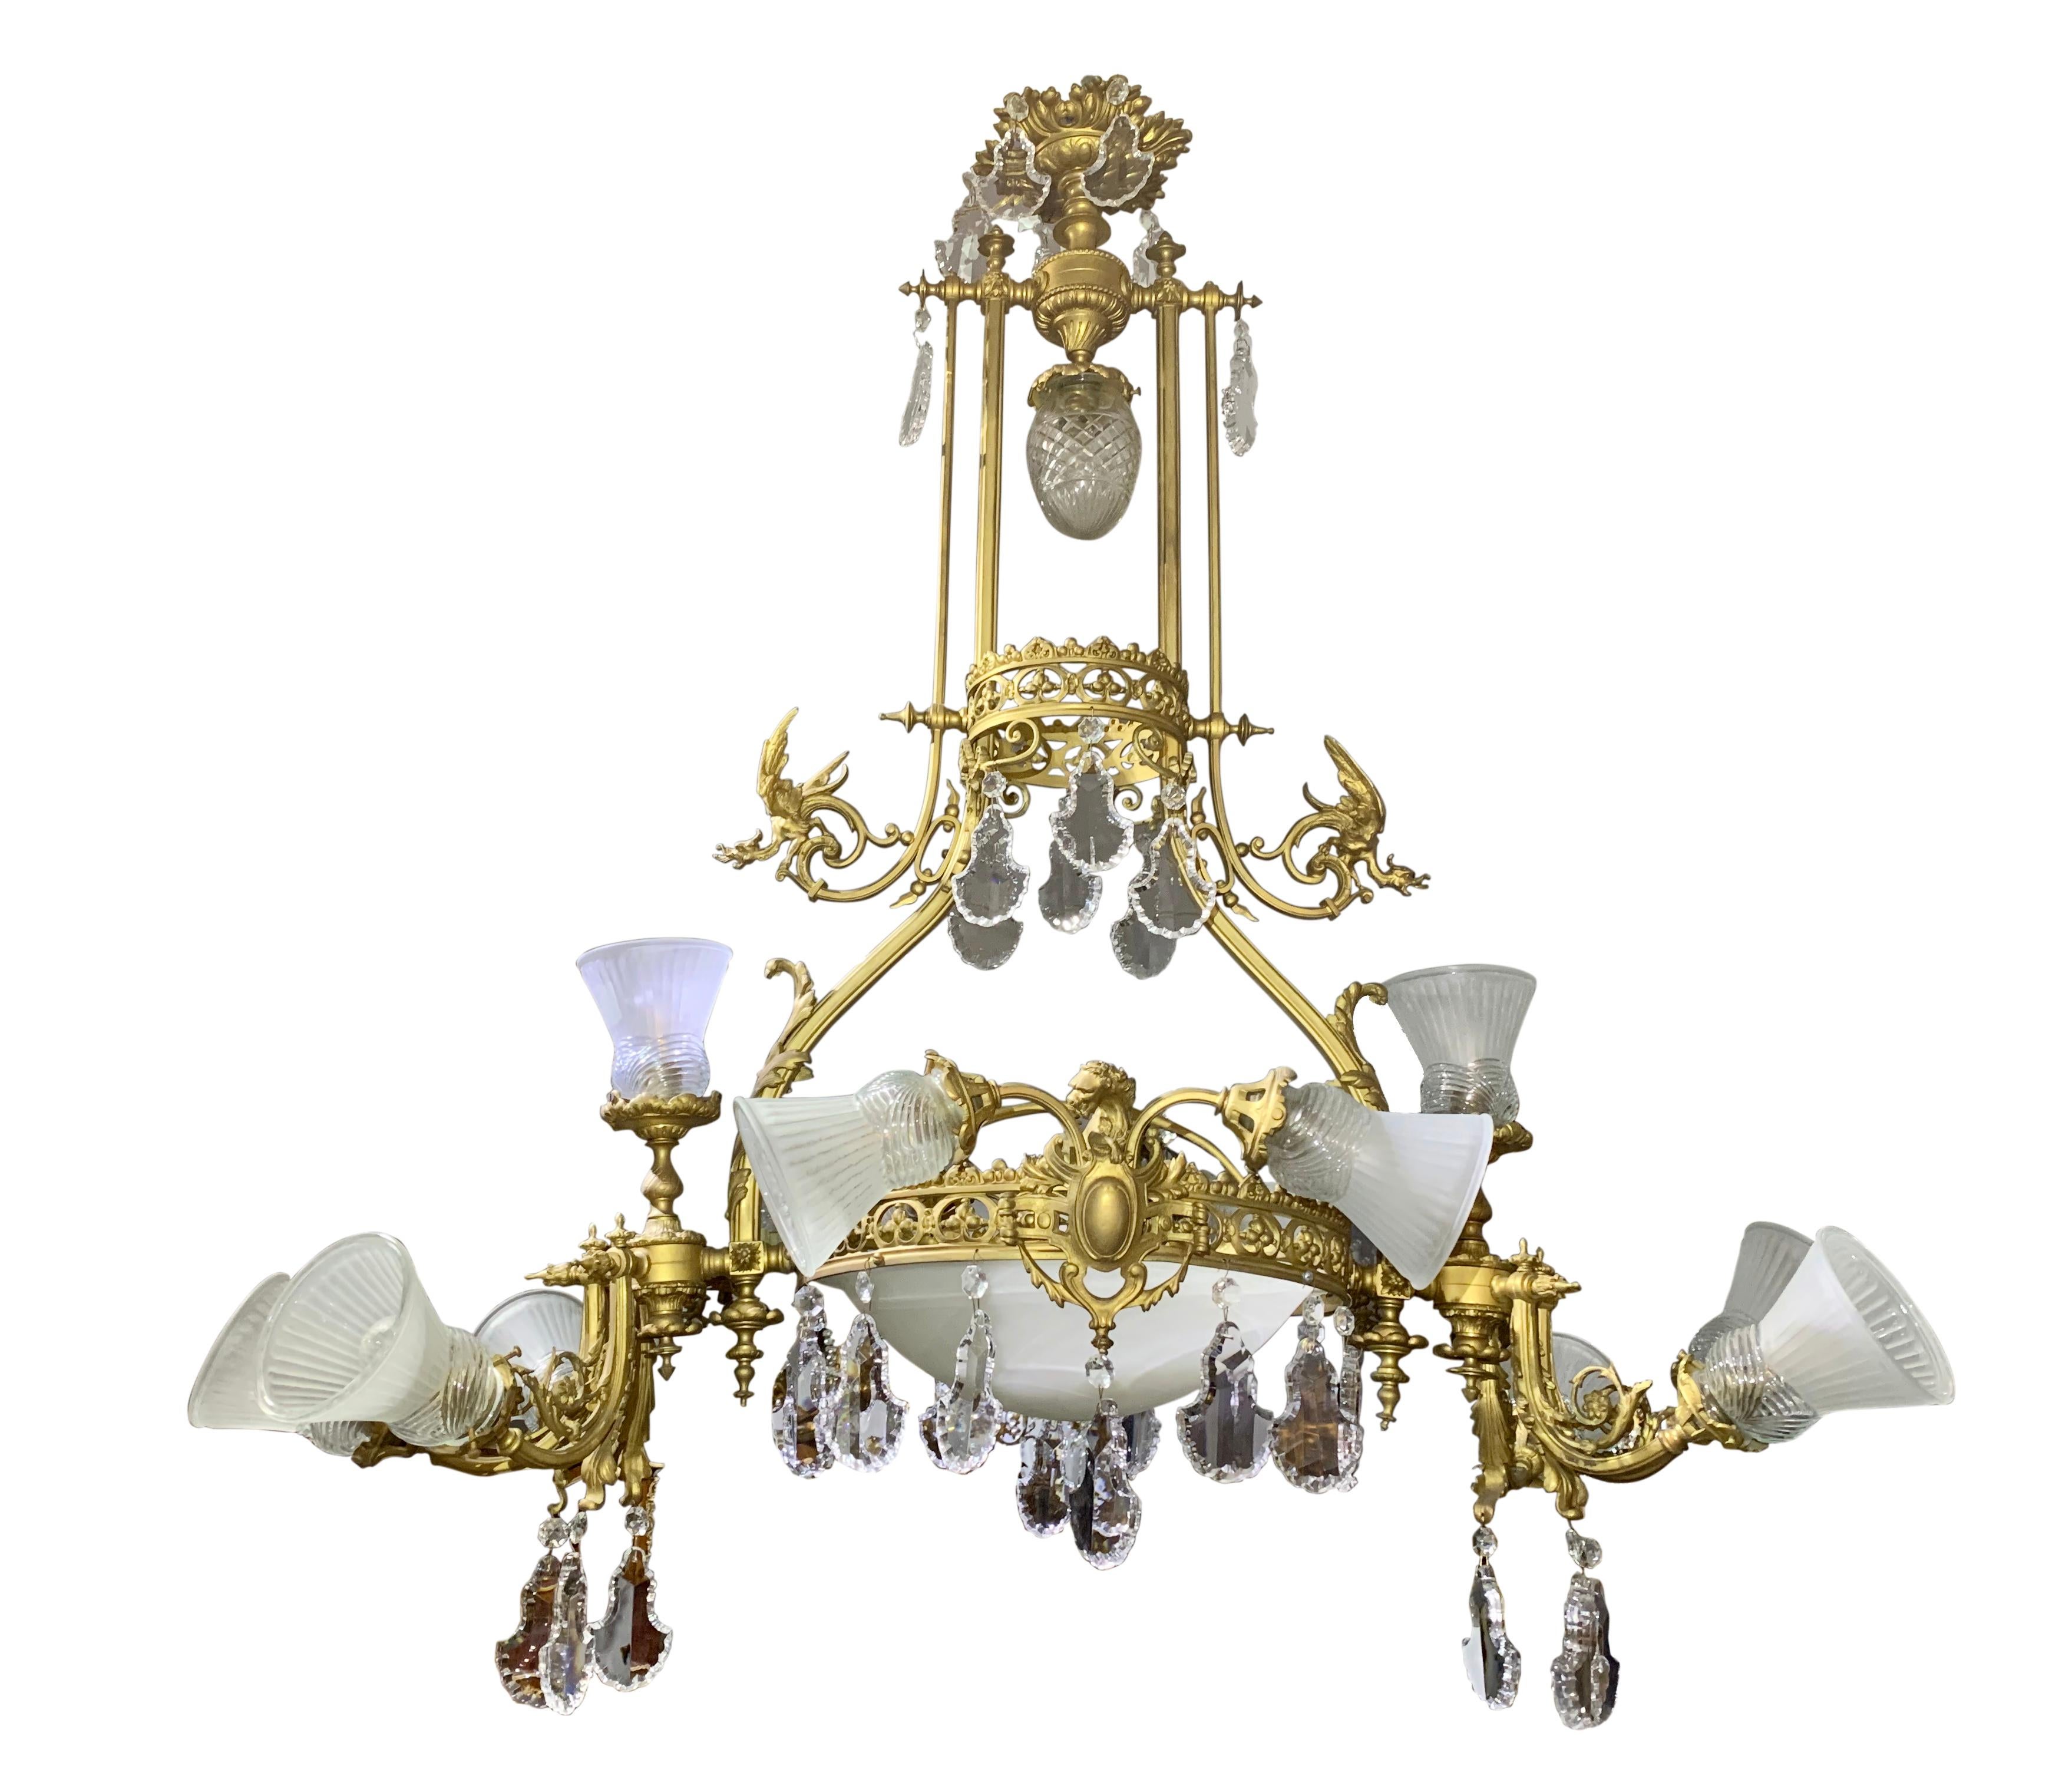 A large late 19th century French Belle époque neoclassical revival style gilt bronze and crystal twelve-light oval shaped chandelier with dragons.

Paris, circa 1890

Height: 51